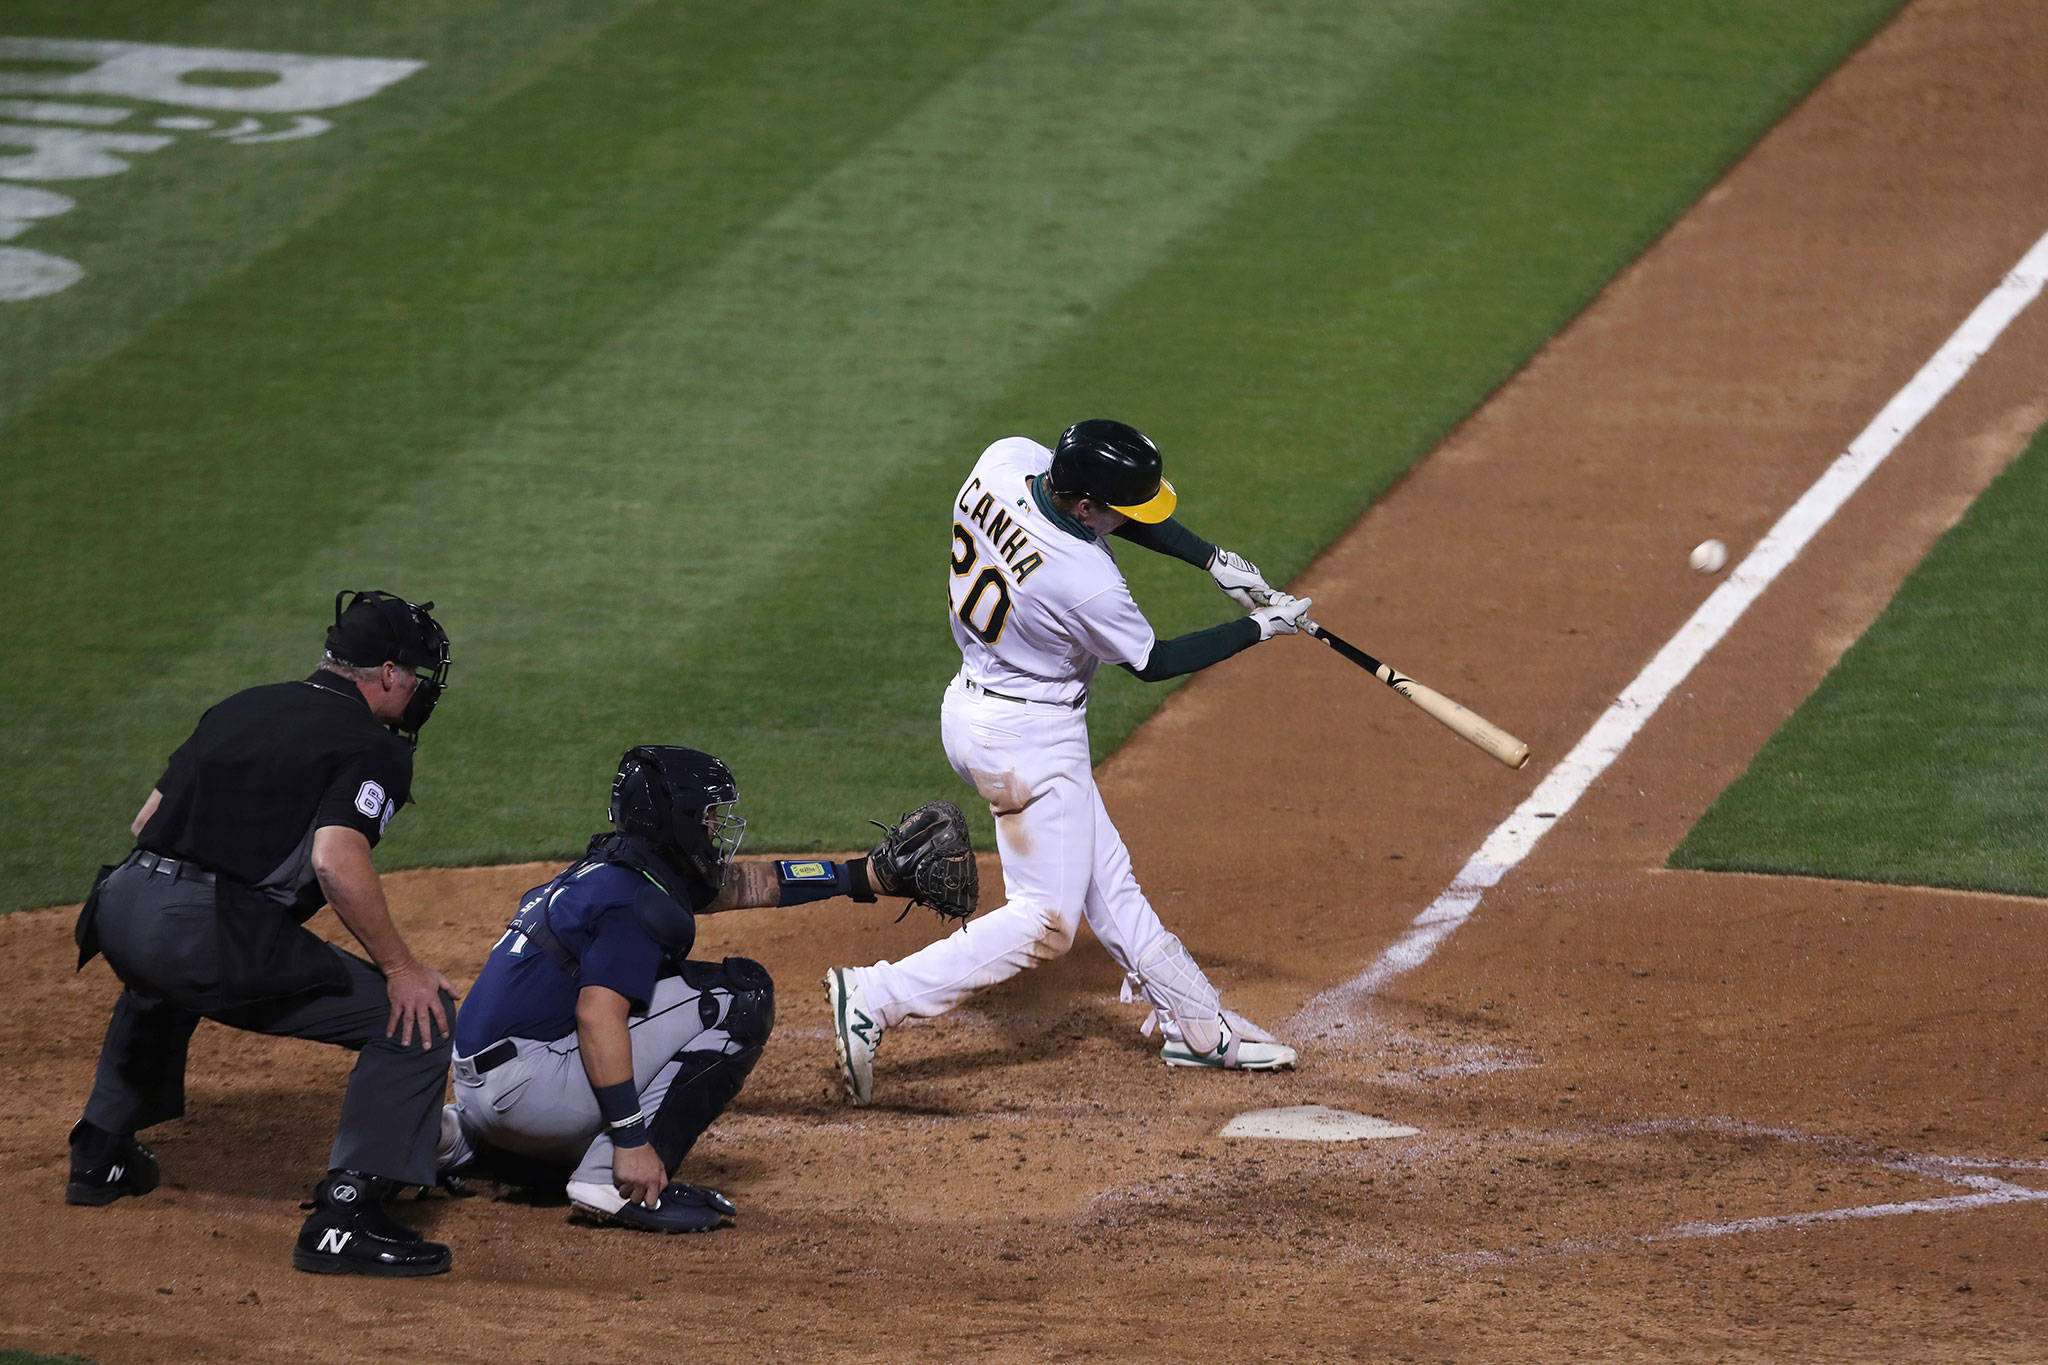 The Athletics’ Mark Canha hits a game-ending, two-run home run against the Mariners during the 10th inning of a game Friday in Oakland, Calif. (AP Photo/Jed Jacobsohn)